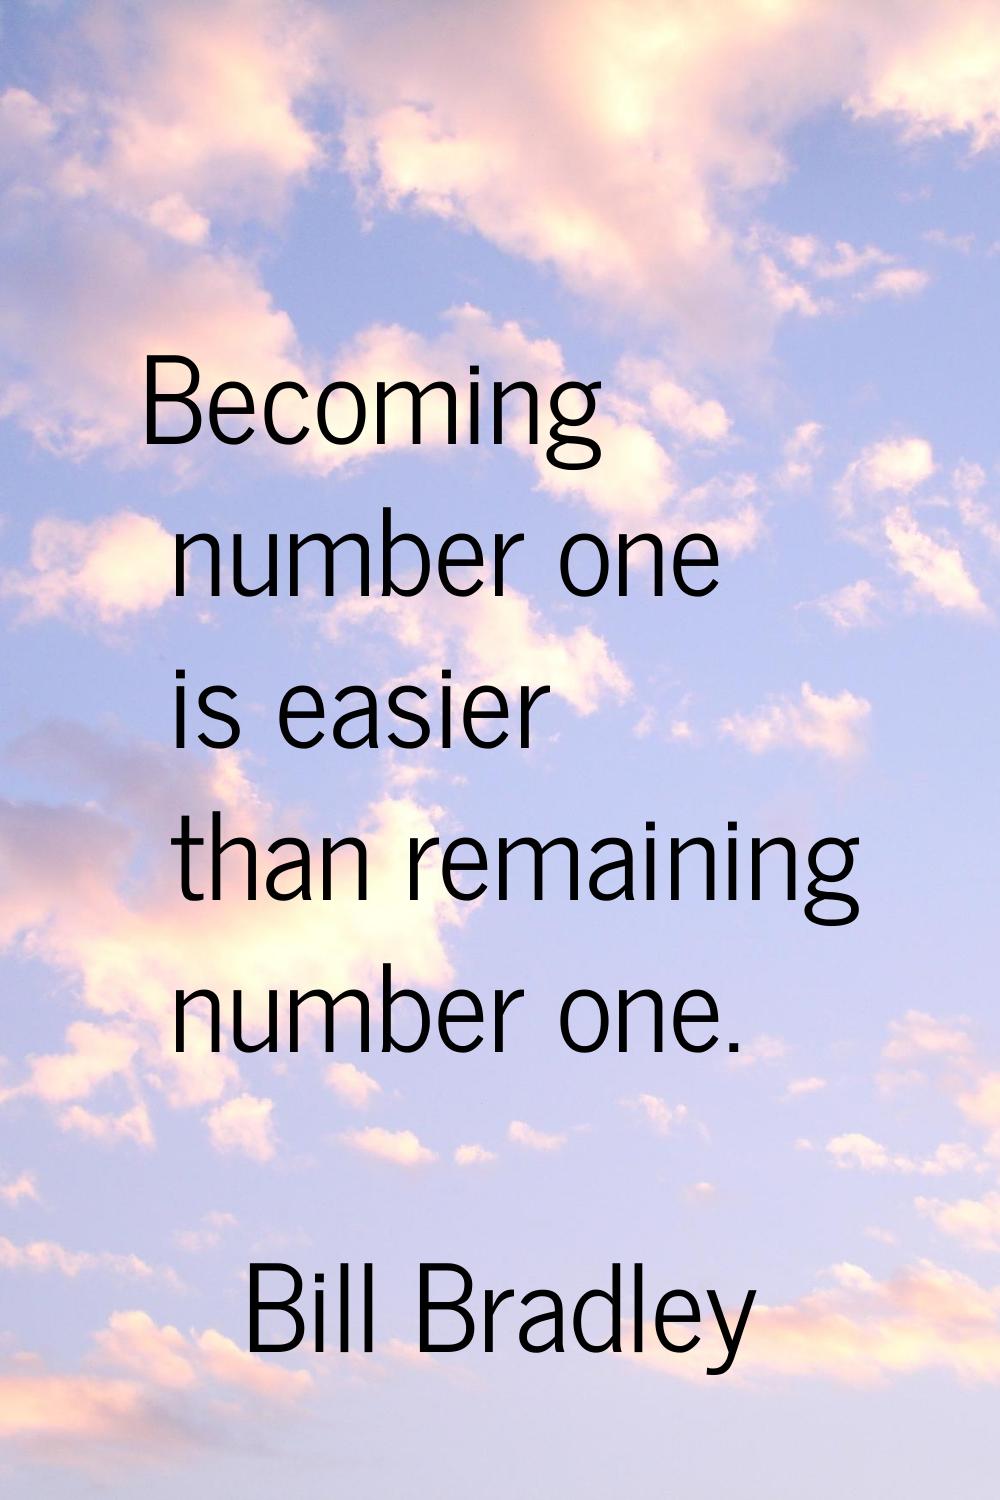 Becoming number one is easier than remaining number one.